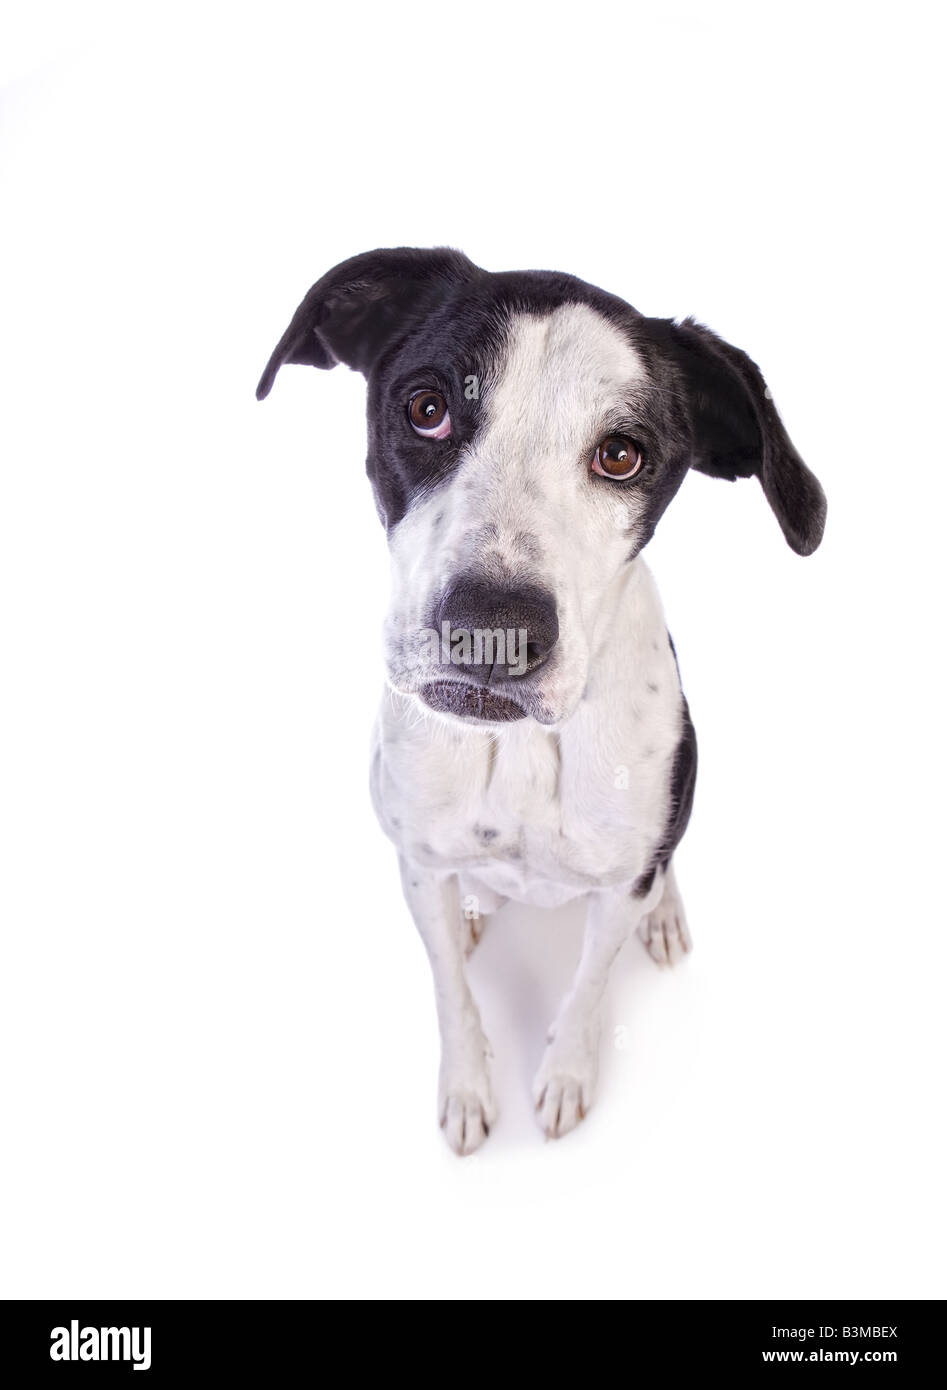 Bashful or sad Black and white Great Dane mix dog with pouty mouth isolated on white background Stock Photo